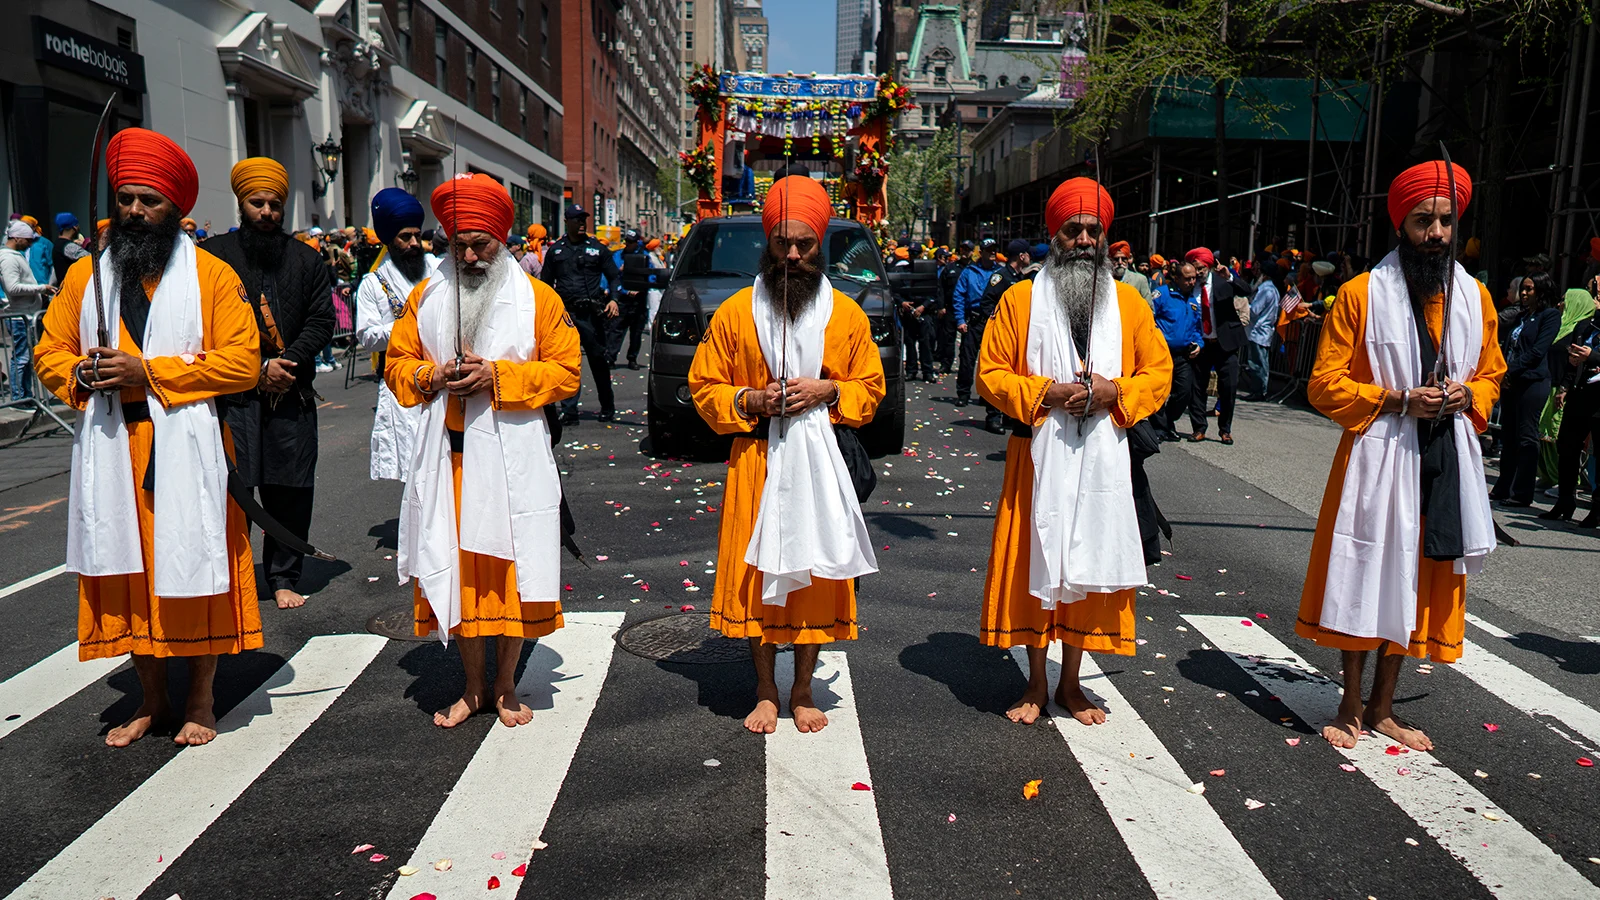 Sikhism from India